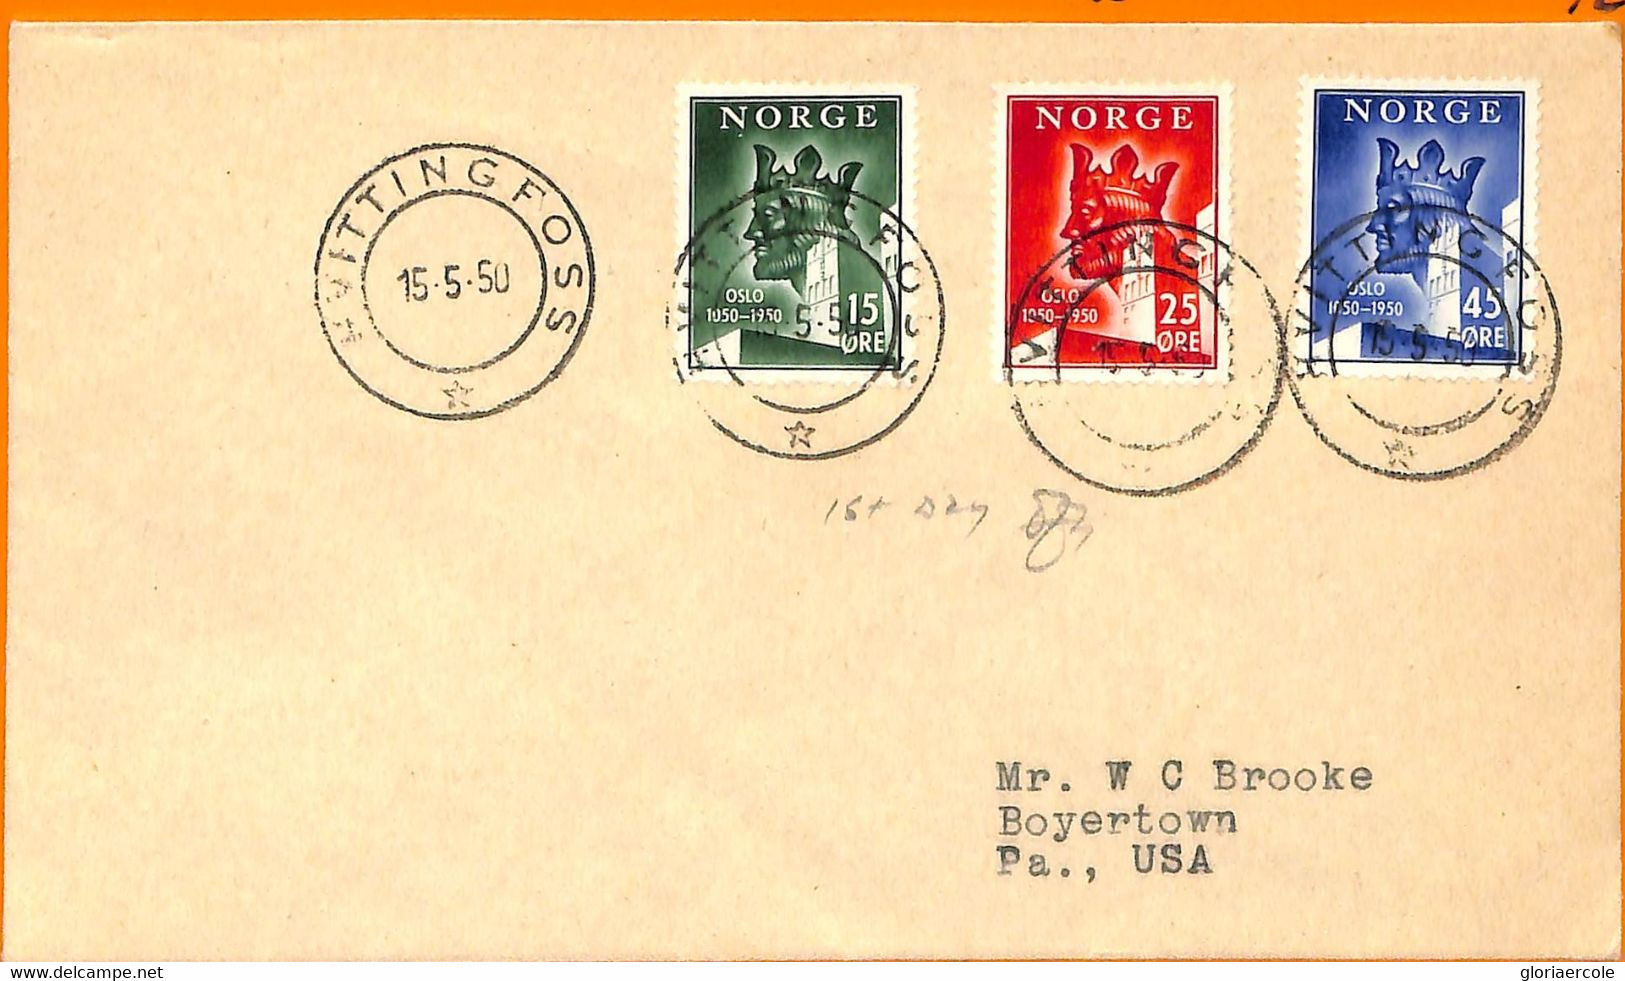 99418 - NORWAY - Postal History -  Cover To The USA 1950 (FDC?) - Covers & Documents